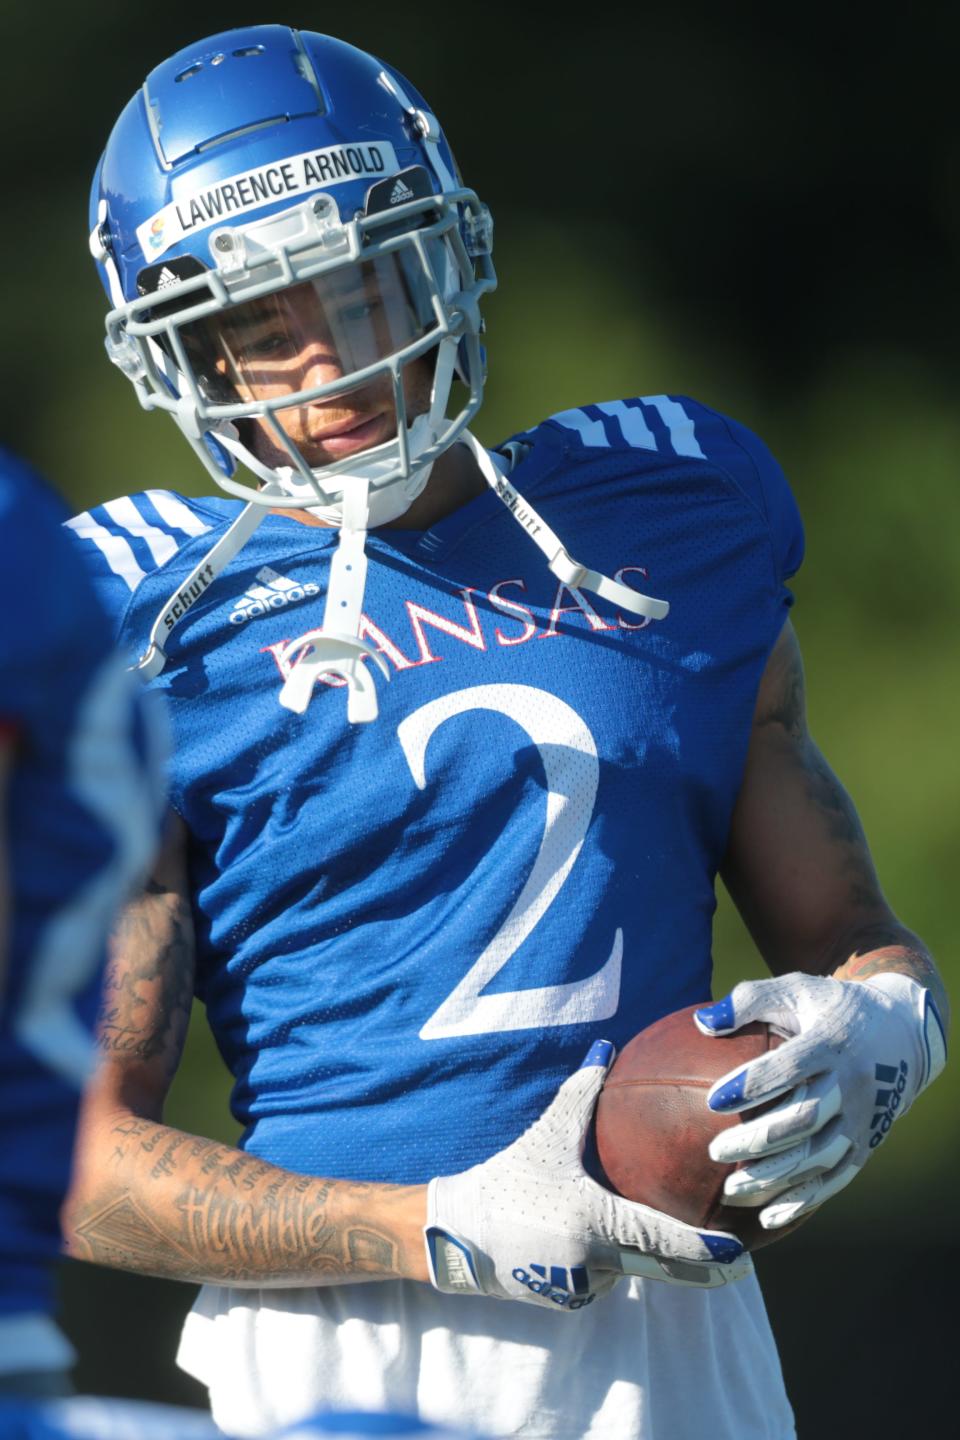 Kansas redshirt sophomore wide receiver Lawrence Arnold (2) works through drills during practice Tuesday morning.